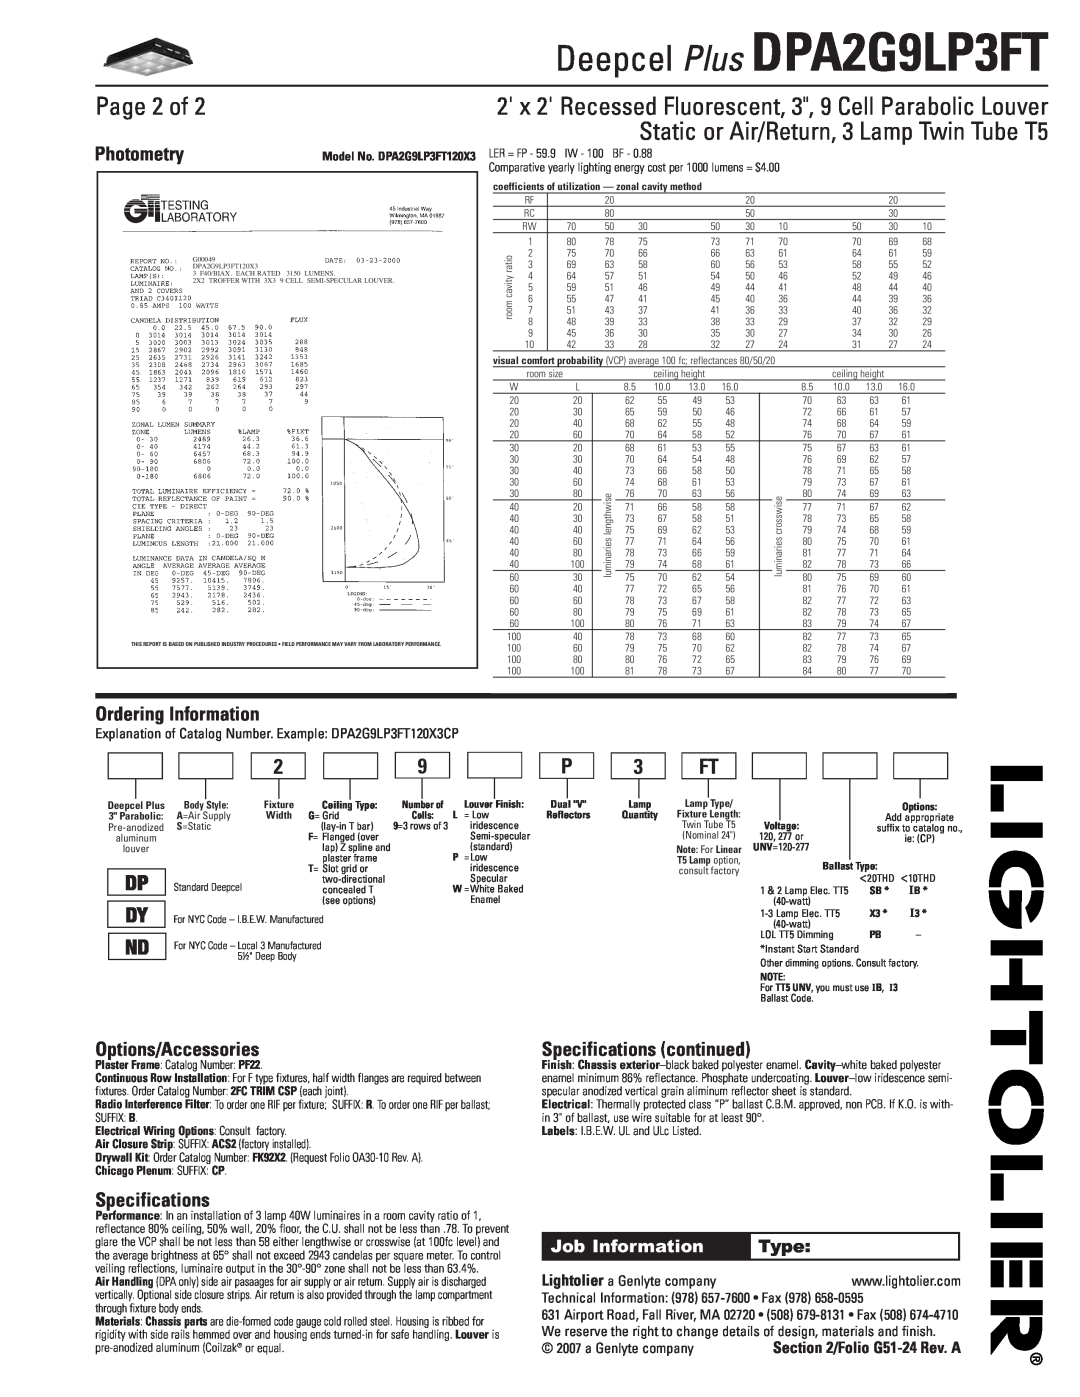 Lightolier DPA2G9LP3FT Page 2 of, Photometry, Ordering Information, Options/Accessories, Specifications, Dp Dy Nd, Type 